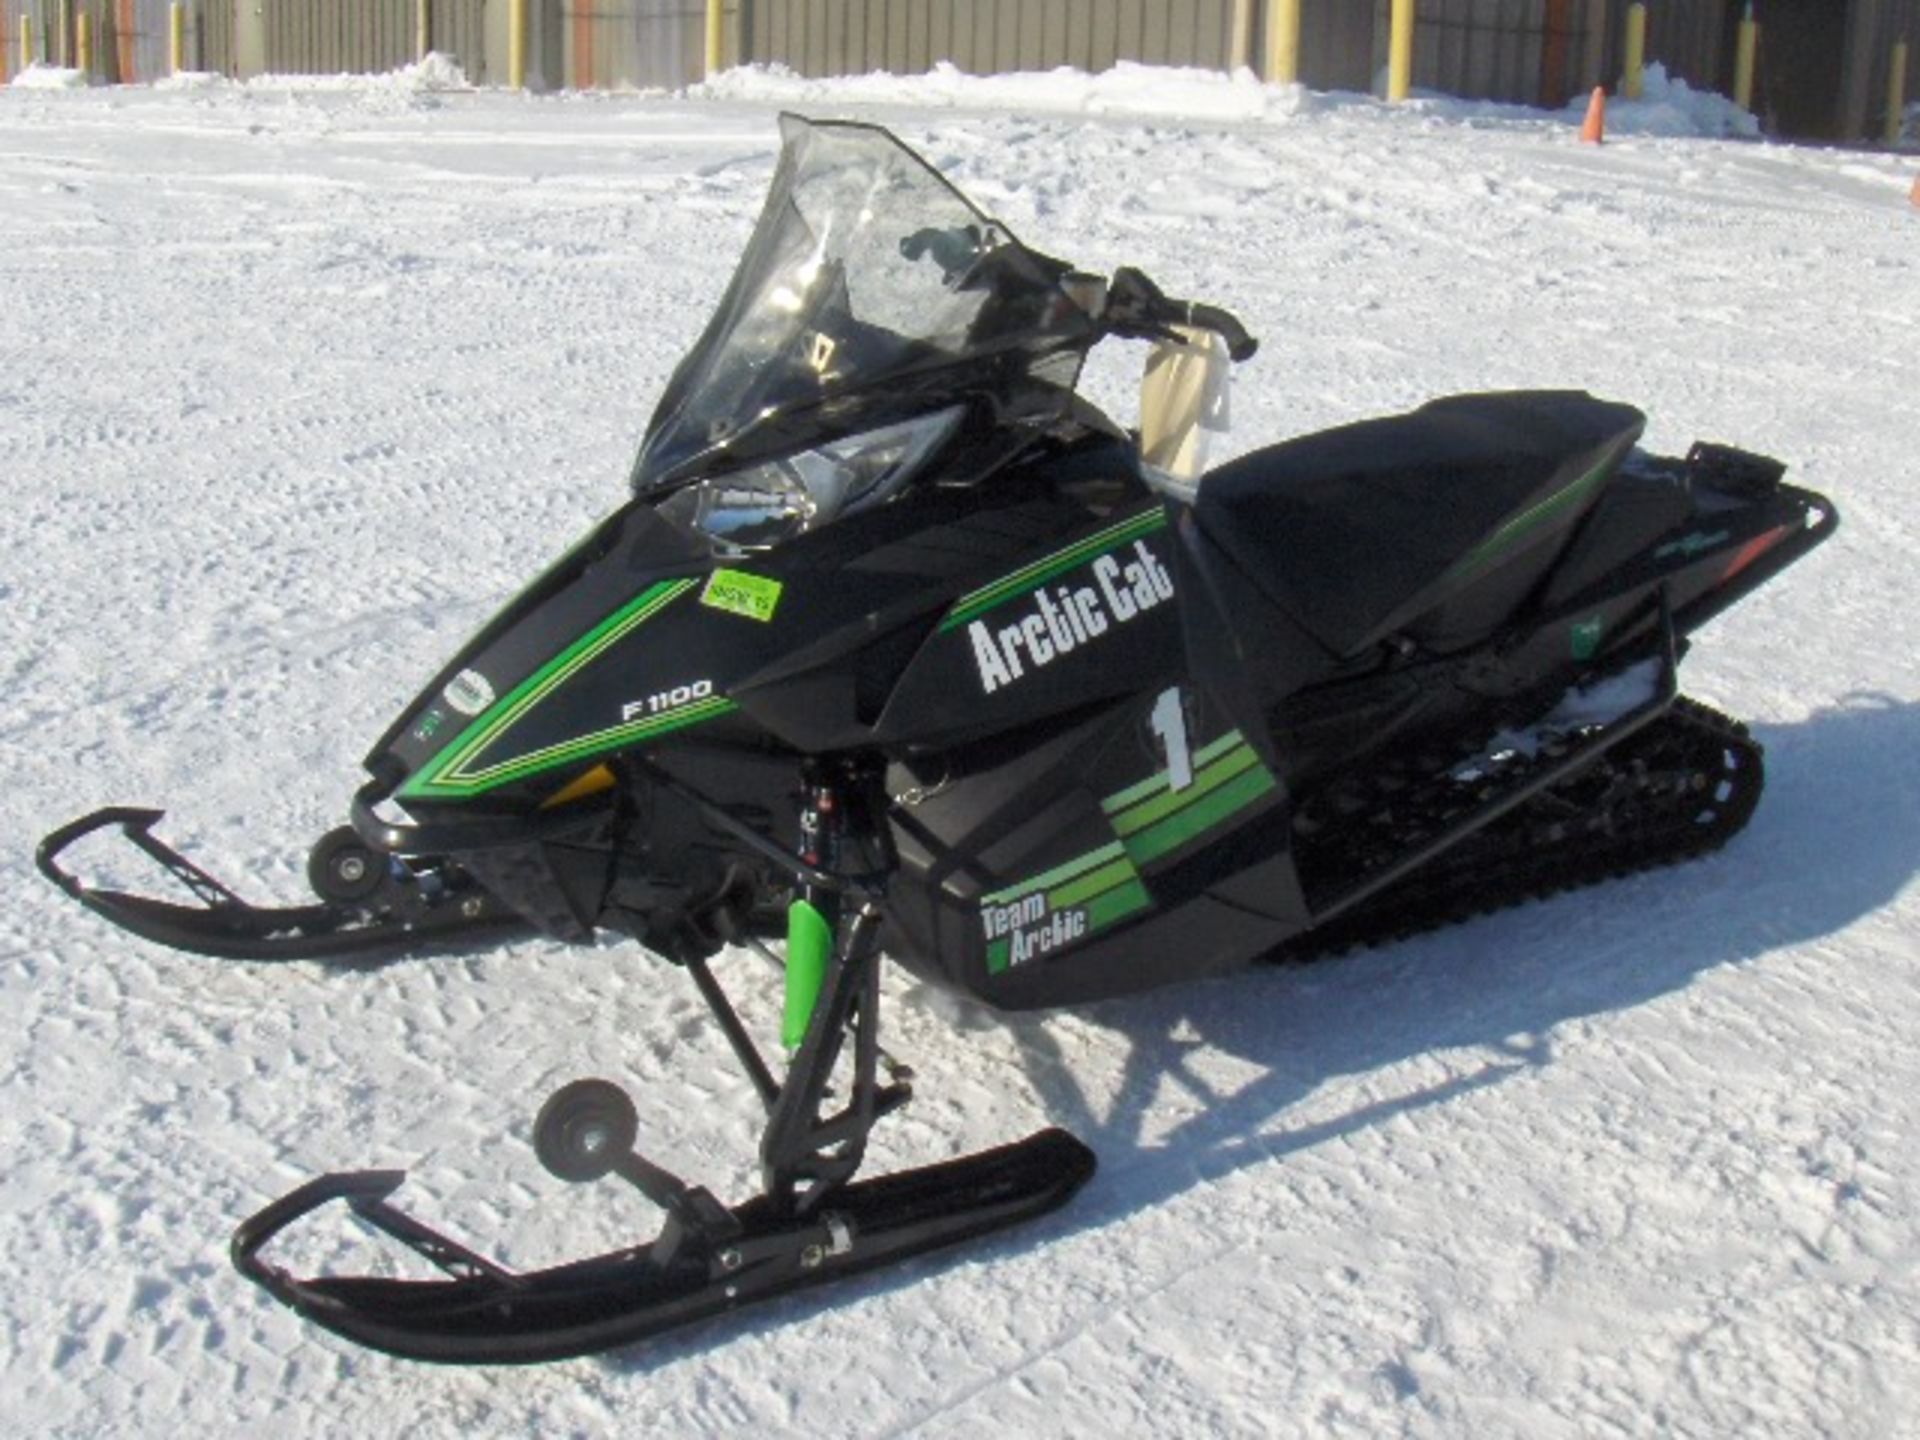 2012 ARCTIC CAT F 1100  4UF12SNW9CT116364 snowmobile, owner started at time of auction check in,